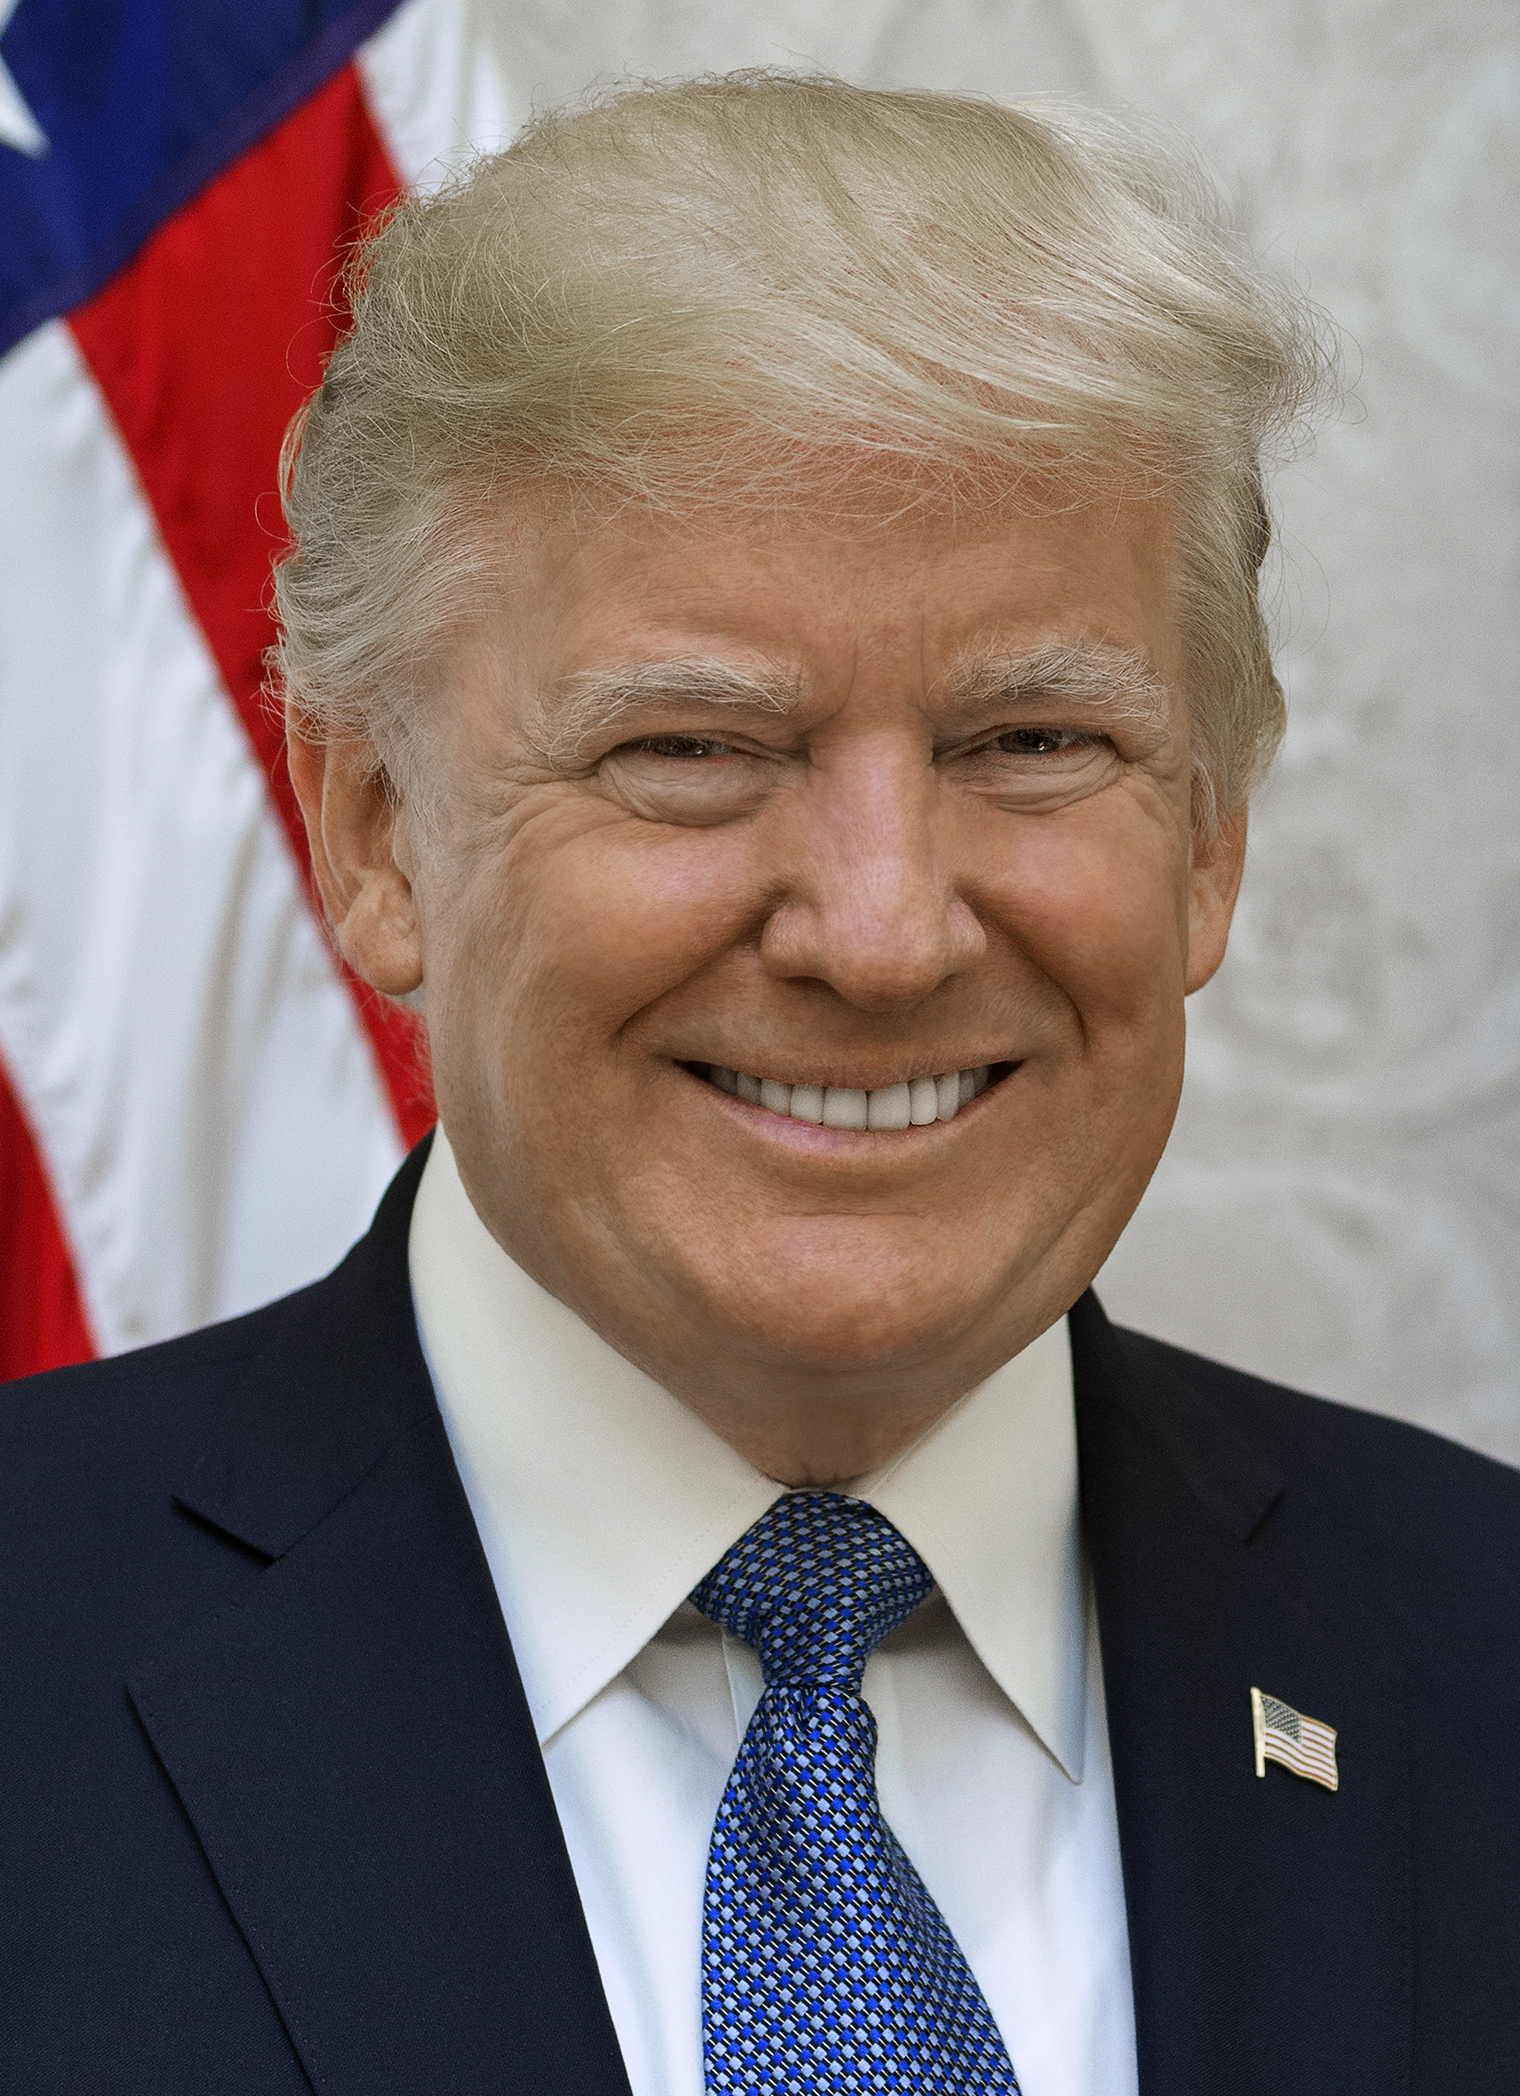 File:Donald Trump official portrait (cropped).jpg - Wikipedia